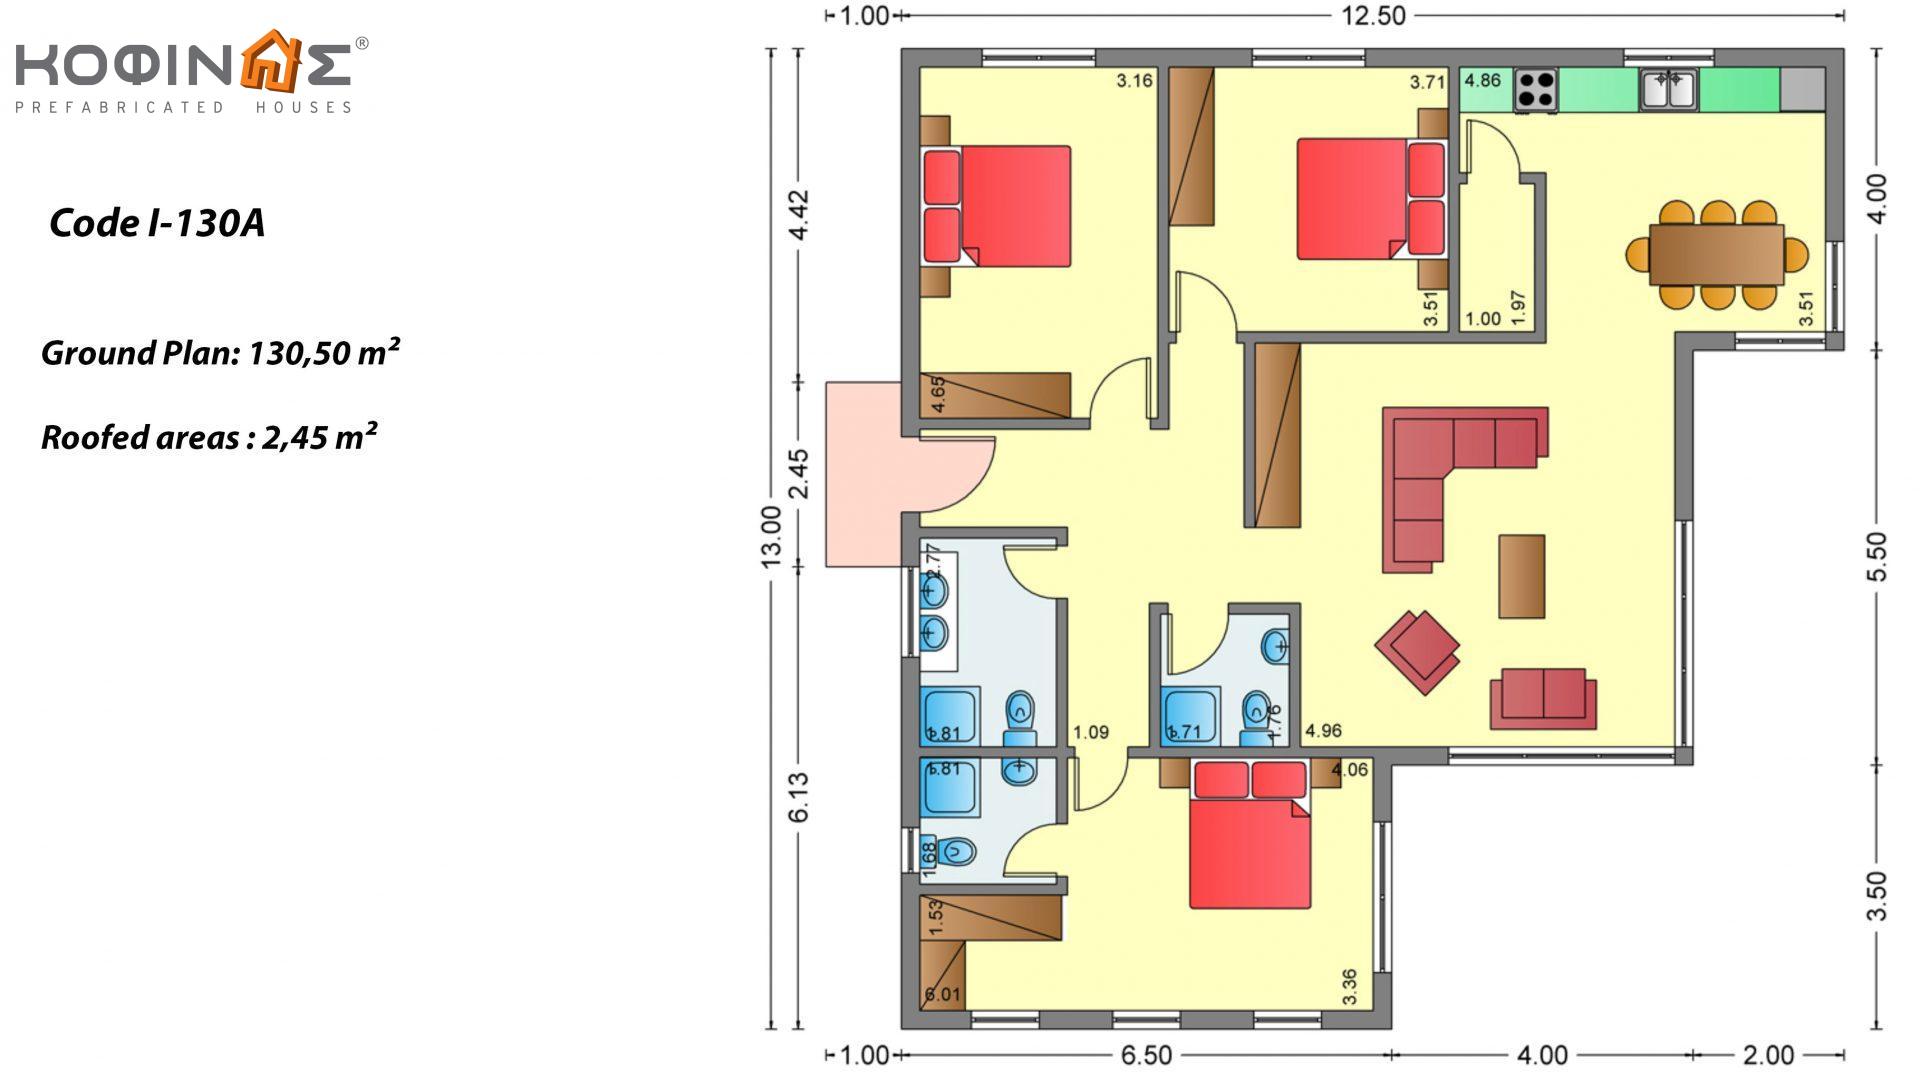 1-story house Ι-130Α, total surface of 130,50 m², covered roofed areas 2,45 m²